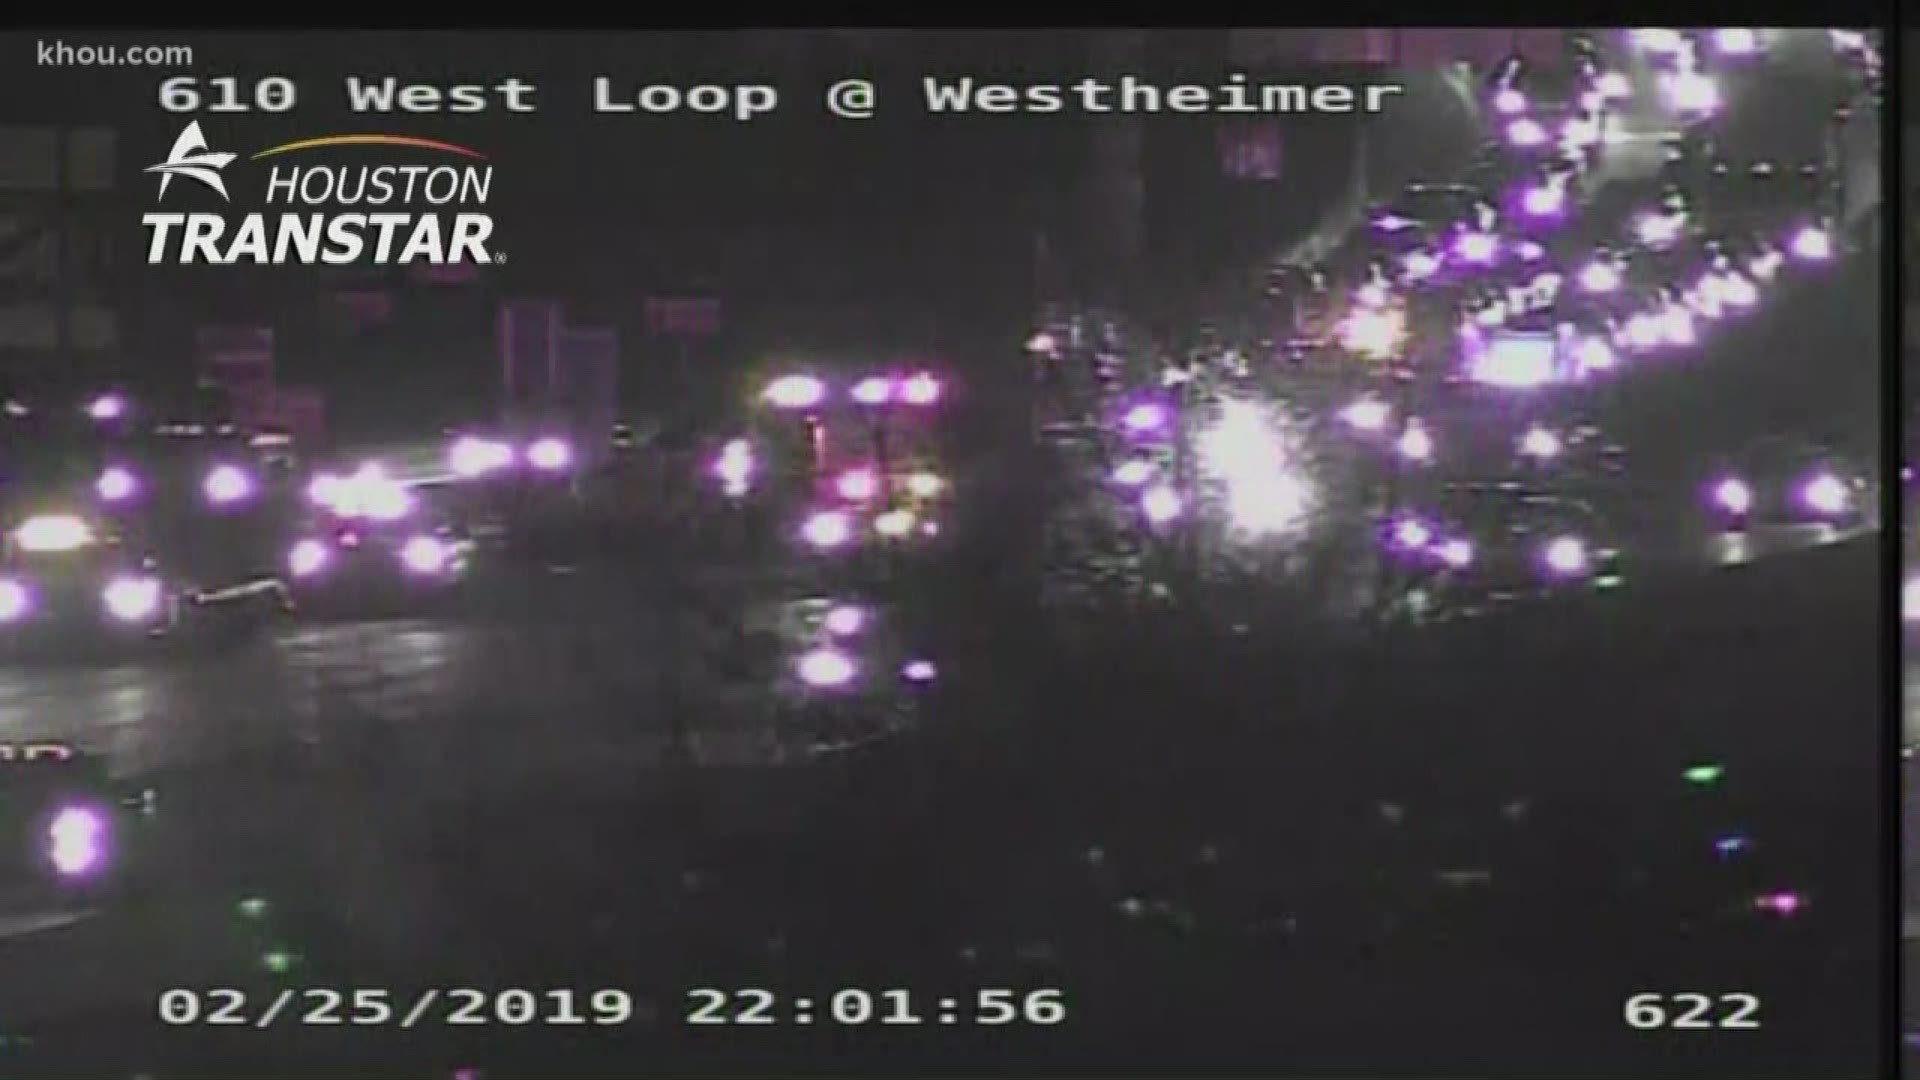 All northbound lanes of the 610 West Loop at Westheimer are shut down due to a truck fire.